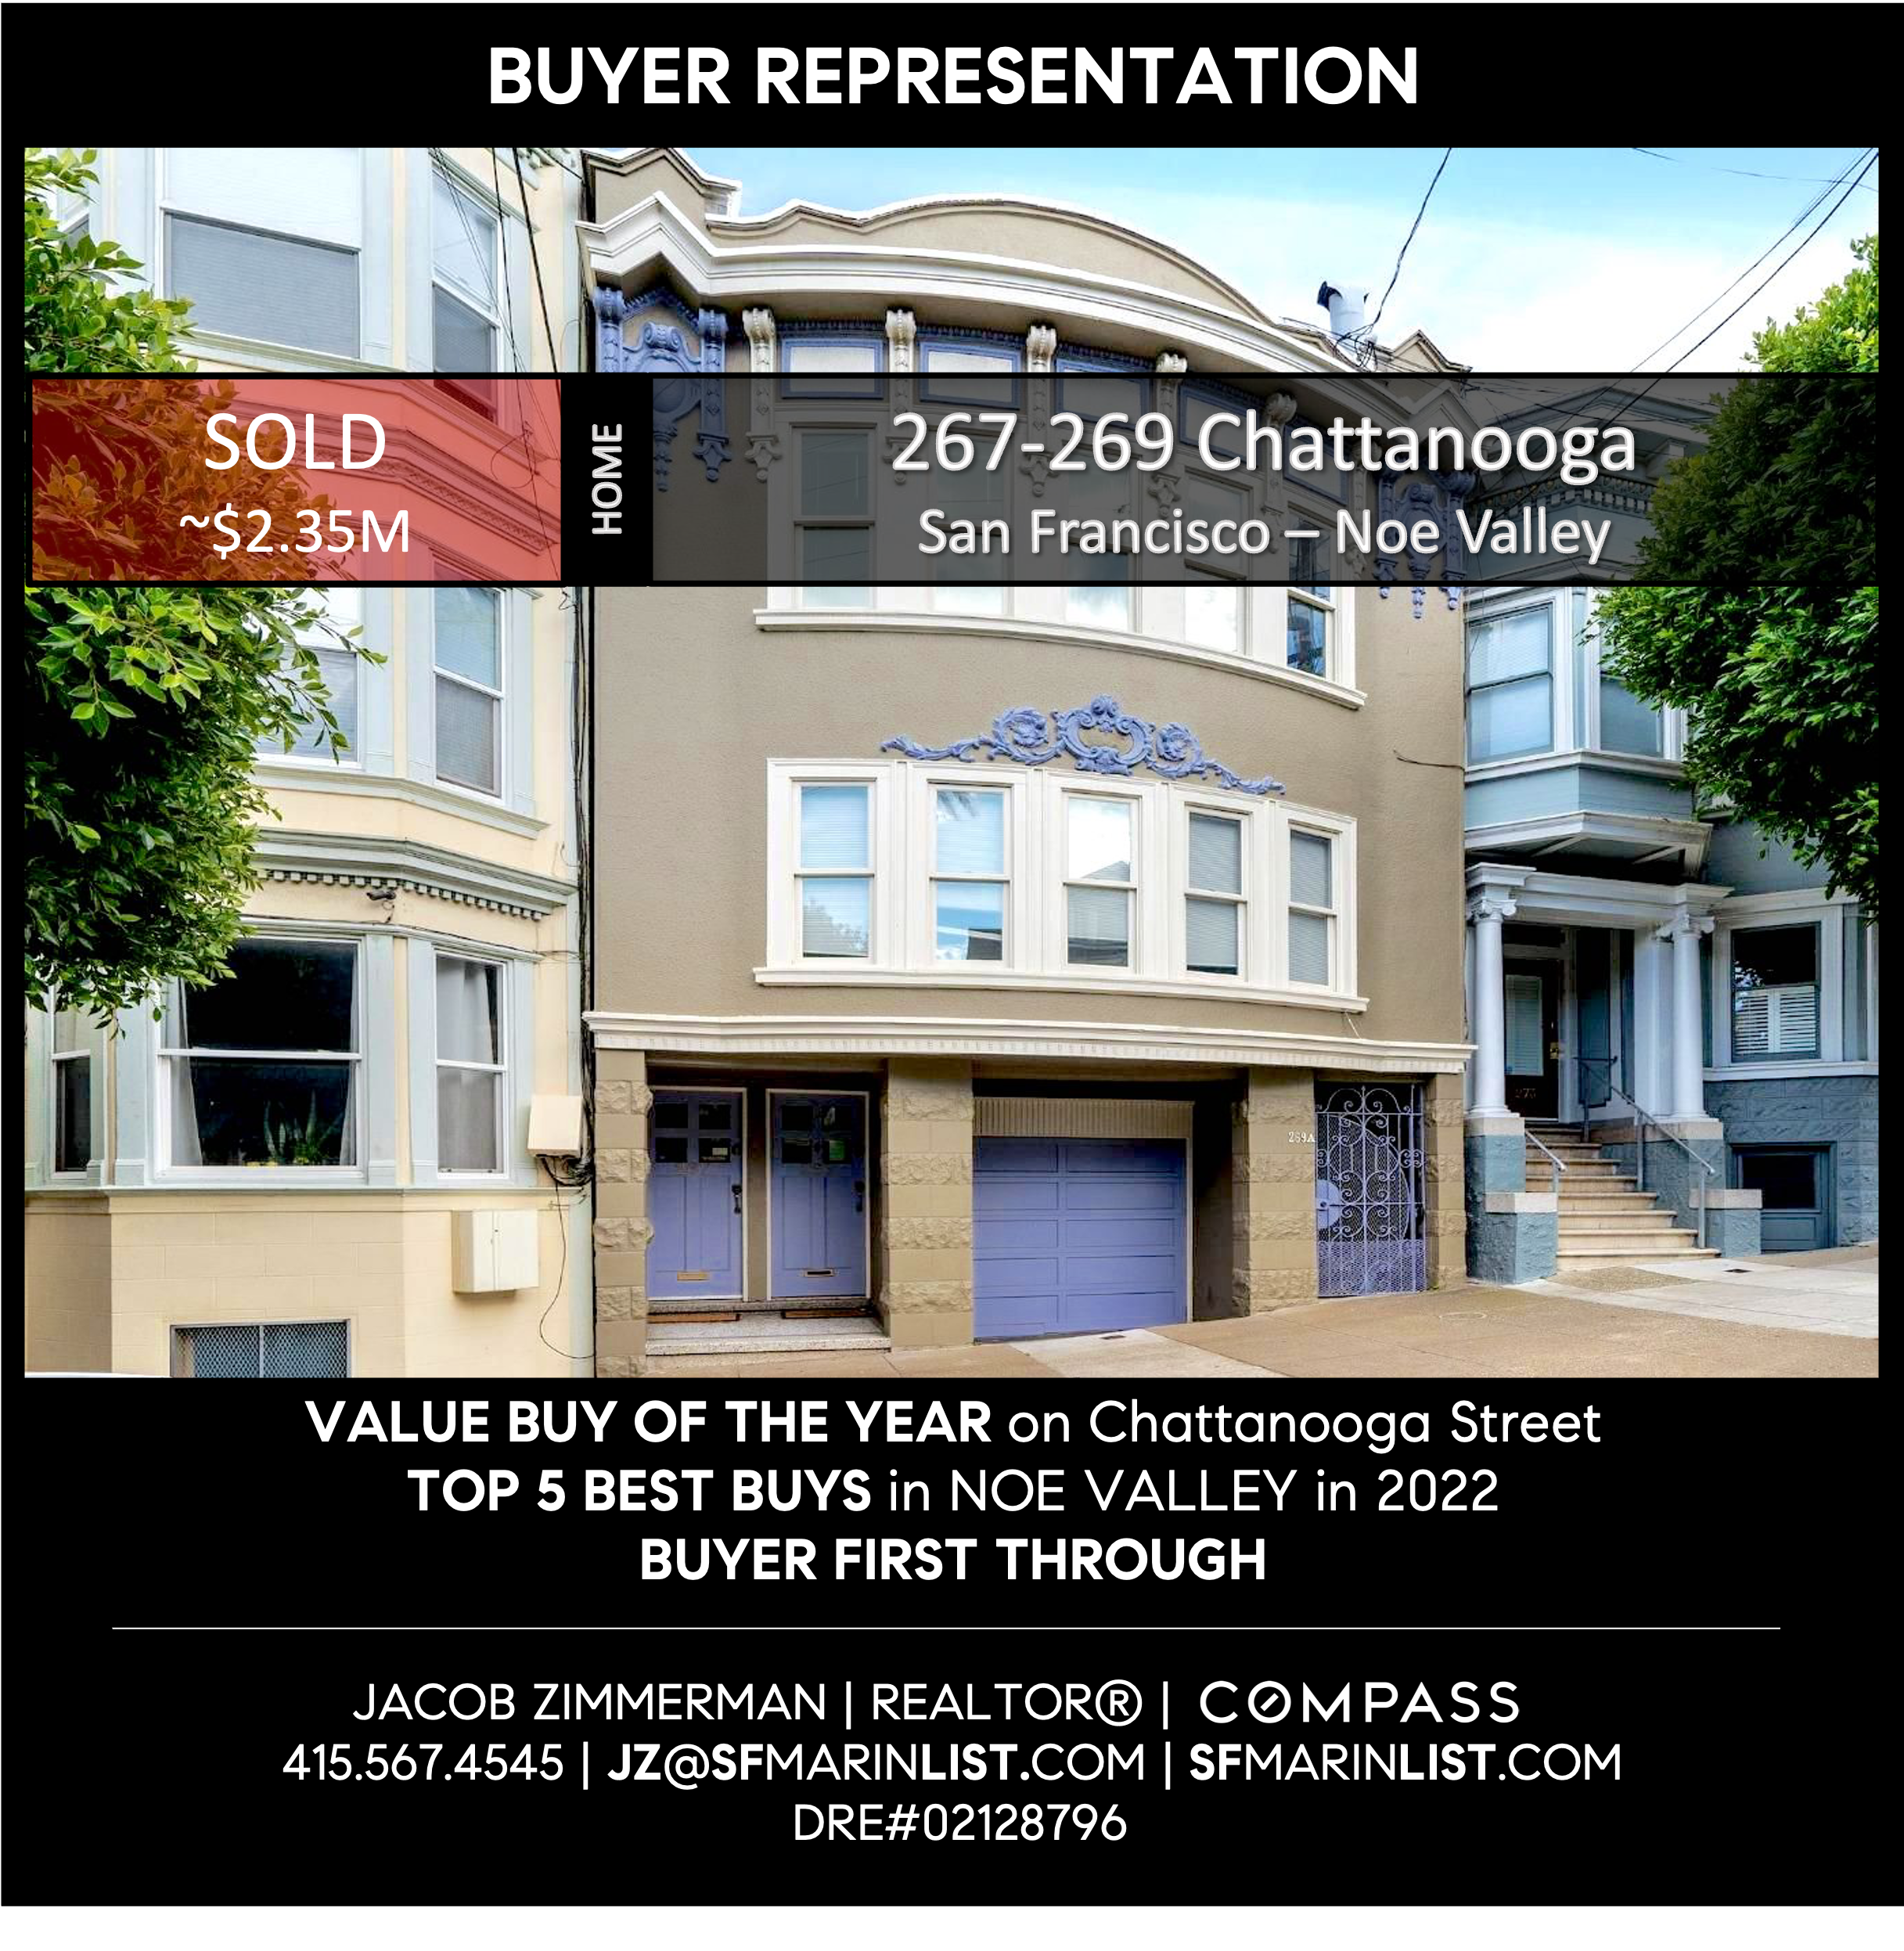 A text banner depicting VALUE BUY OF THE YEAR in Chattanooga Street and highlighting the TOP 5 BEST BUYS in Noe Valley in 2022. The contact information for potential buyers is BUYER2022267-269262415567454502128796.